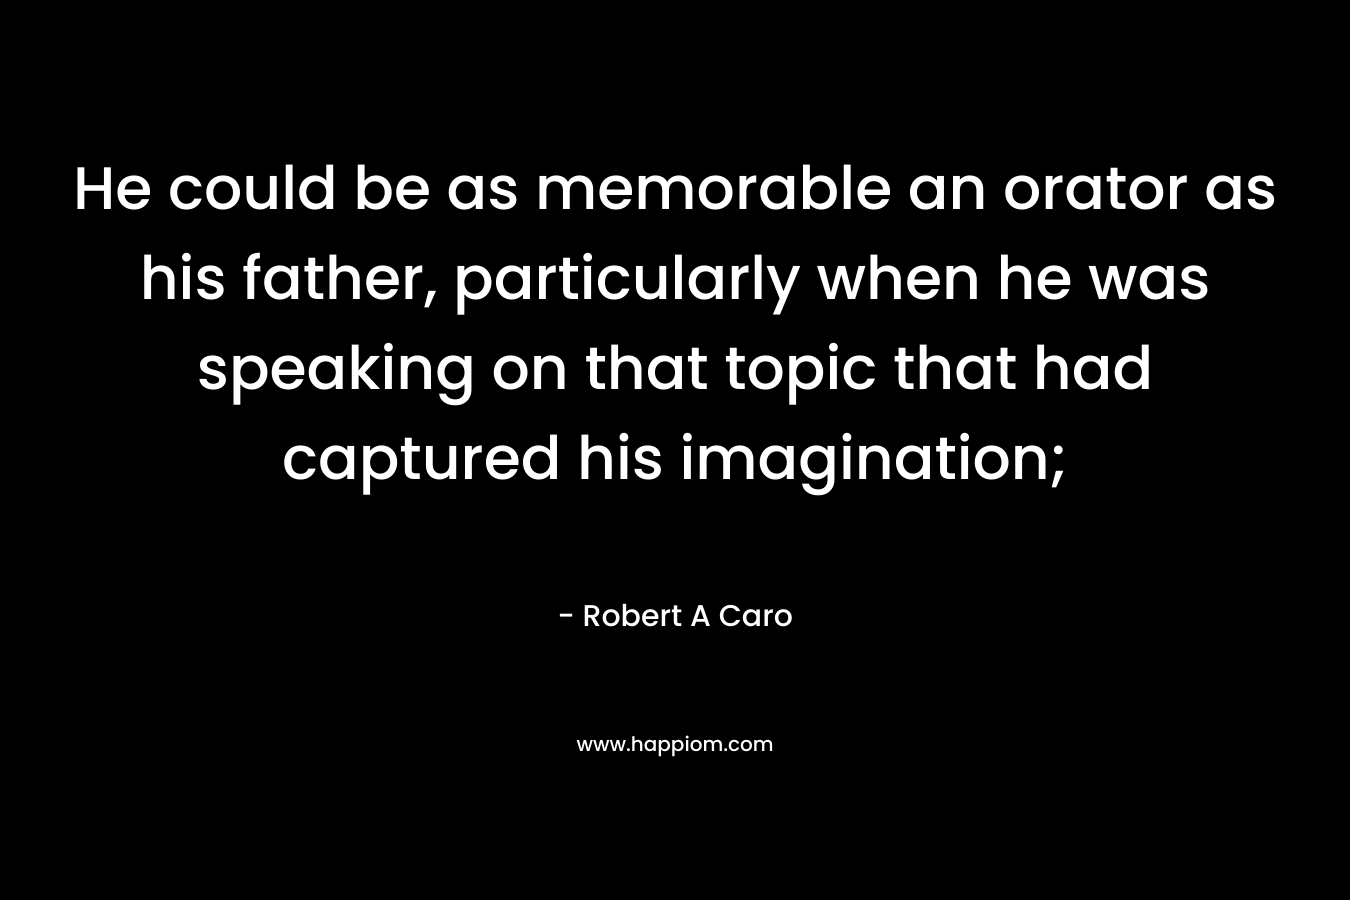 He could be as memorable an orator as his father, particularly when he was speaking on that topic that had captured his imagination;